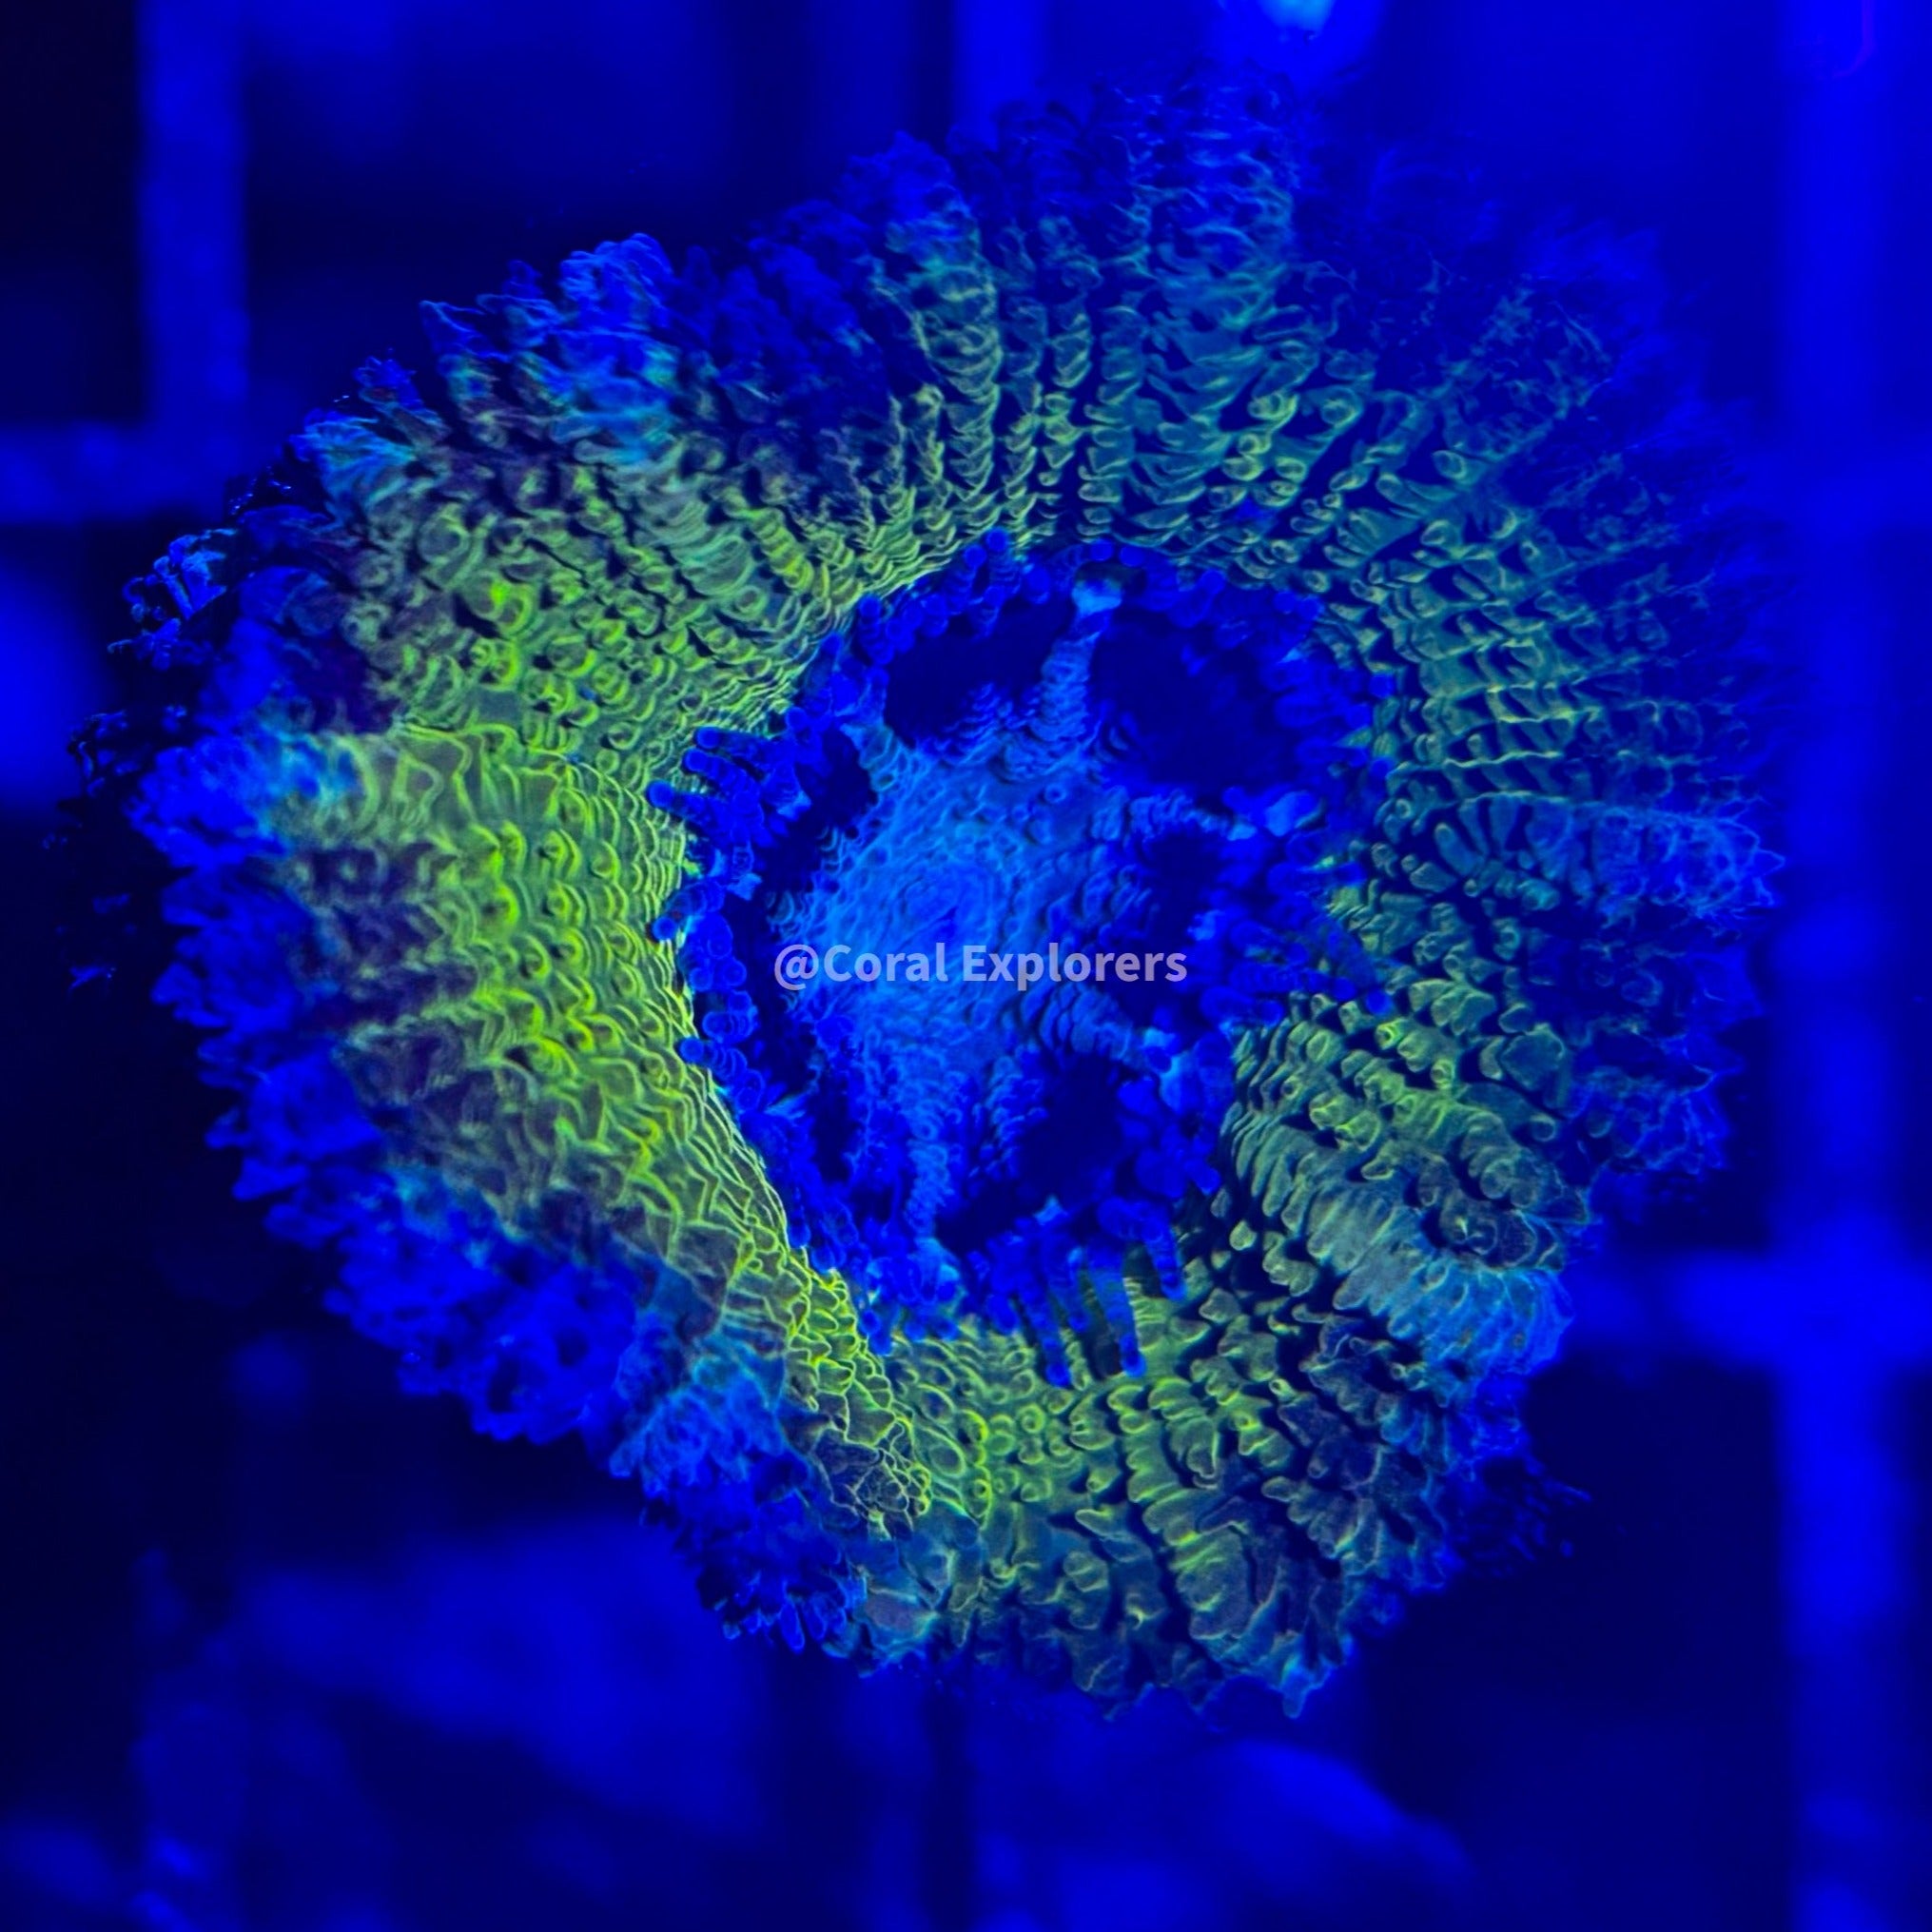 CE- WYSIWYG LA Lakers Acan Lord Micromussa Coral Frag LPS SPS #R1OA9